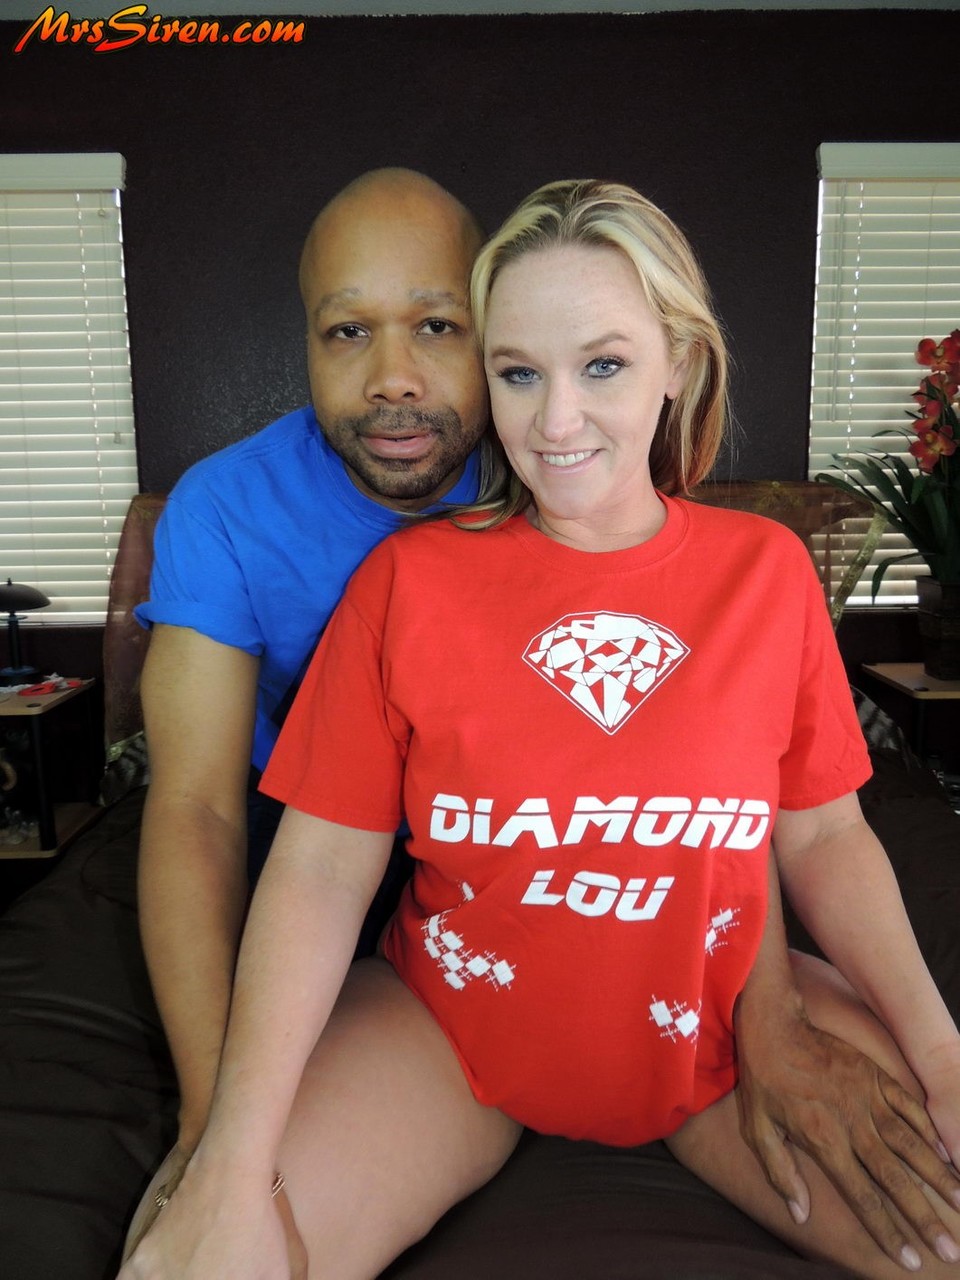 Blonde amateur Dee Siren shows her natural tits before donning a T-shirt foto porno #425423805 | Mrs Siren Pics, Dee Siren, Chubby, porno móvil